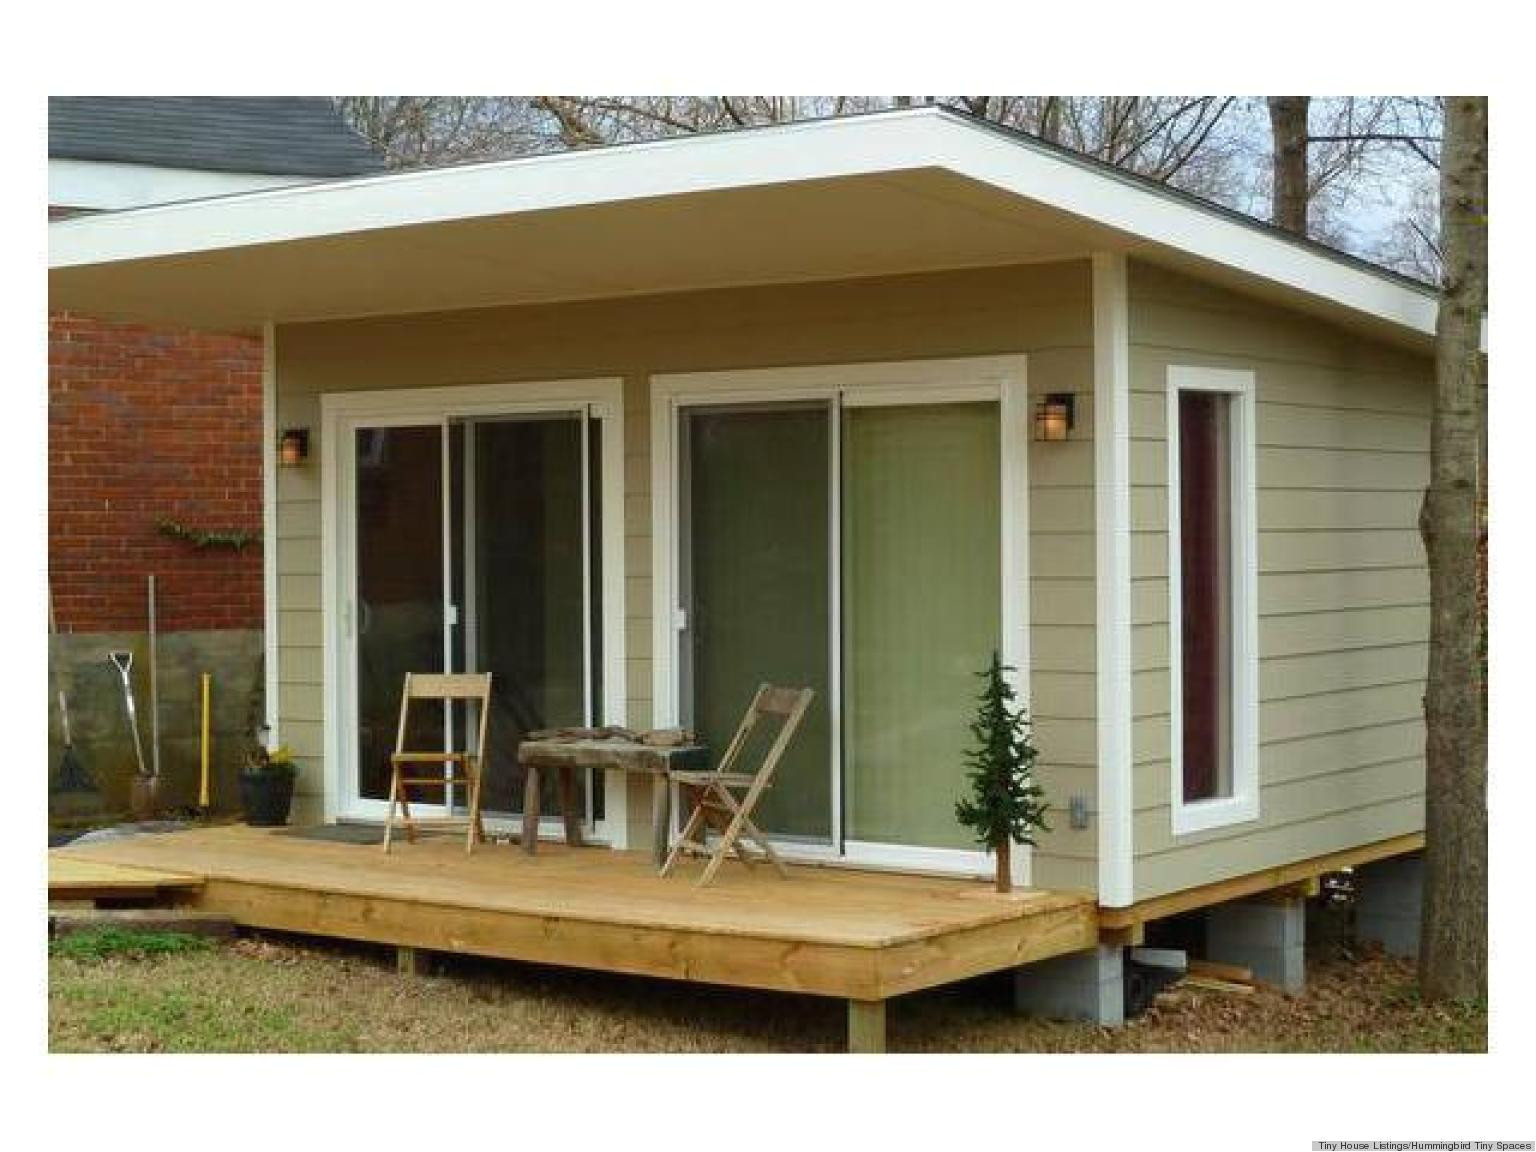 Home Depot Micro House Plans How to Build Cabin Plans Home Depot Pdf Plans